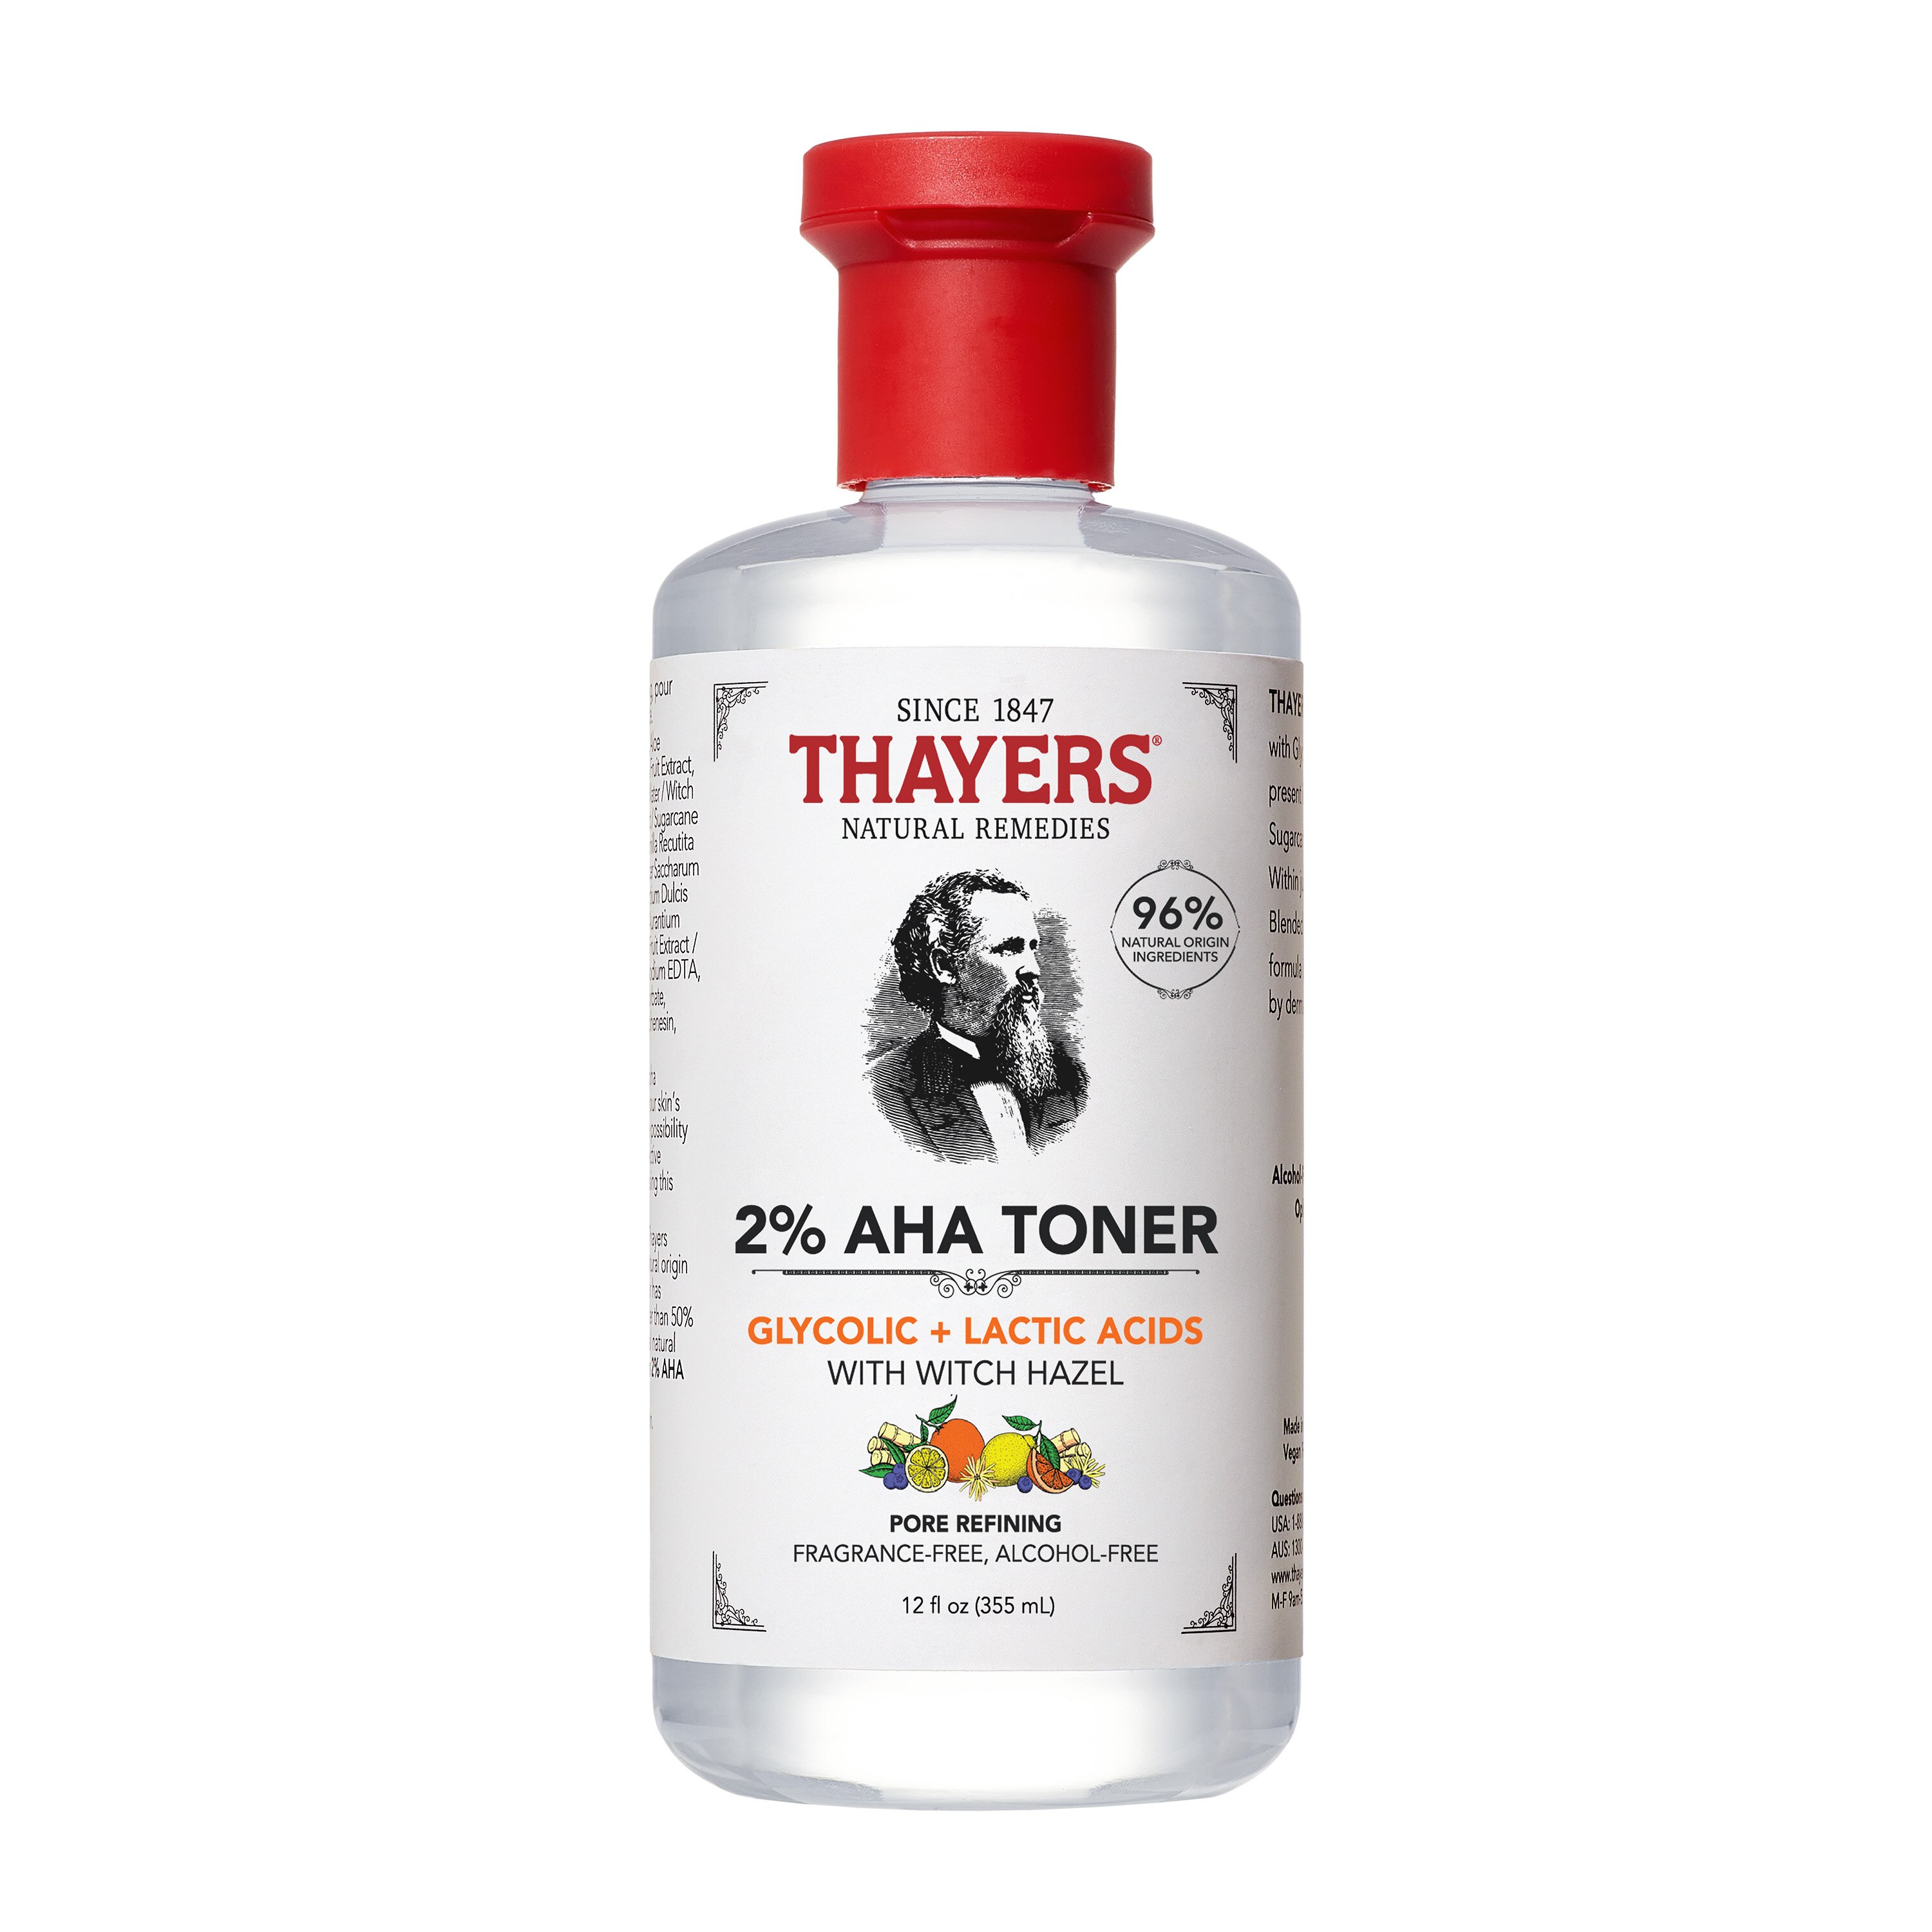 Thayers 2% AHA Toner with Glycolic and Lactic Acids, 12 oz